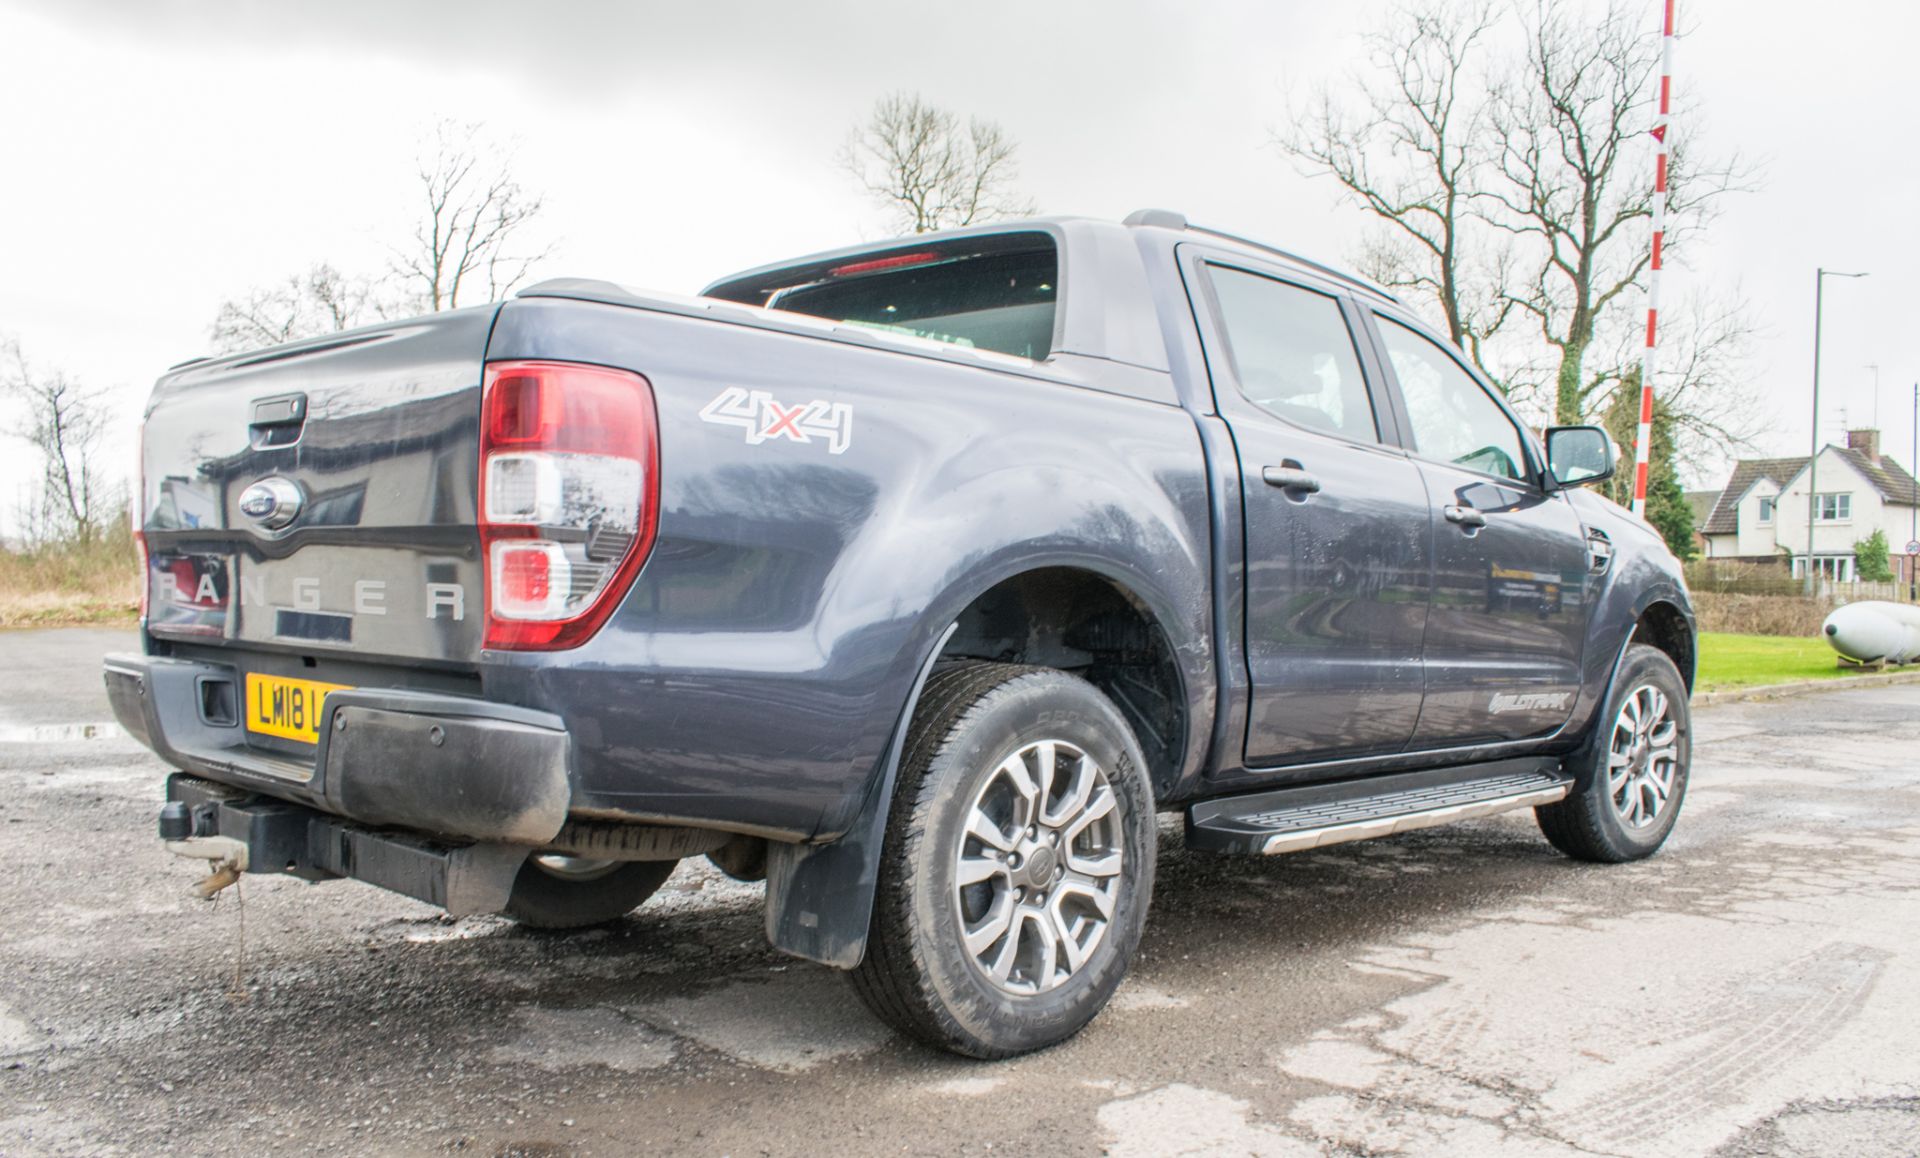 Ford Ranger Wildtrak 4 x 4 DCB TDCI automatic pick-up Registration number: LM18 LKE Date of - Image 3 of 24